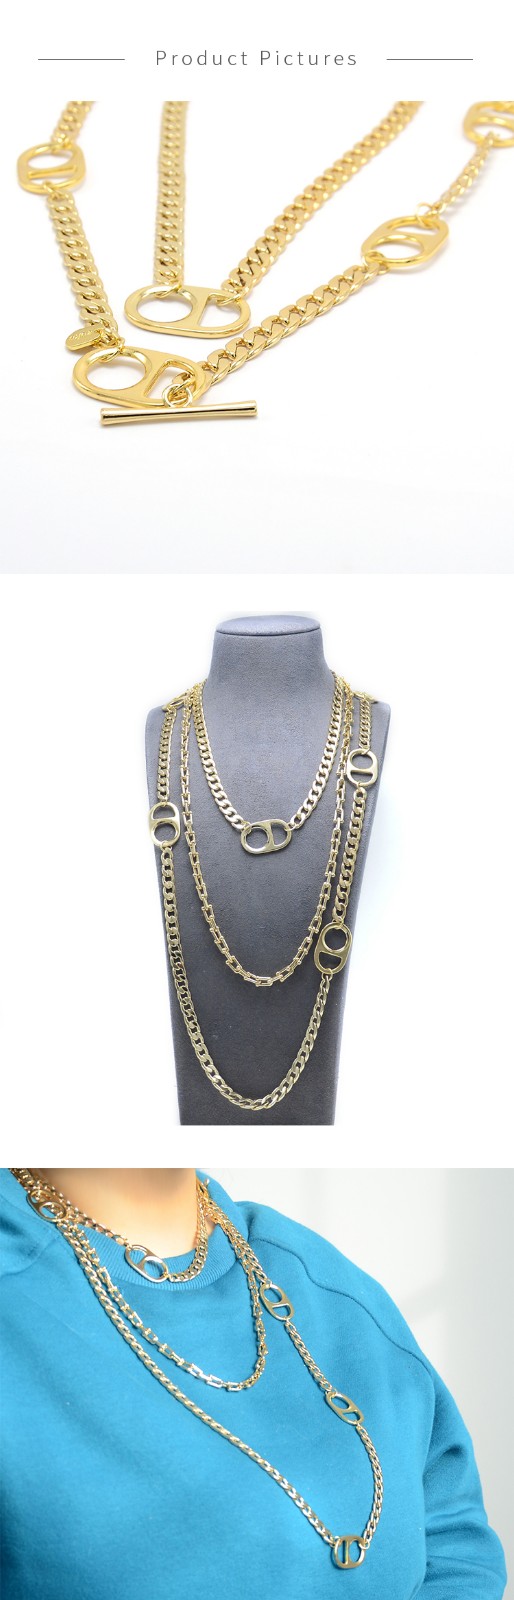 3 Layer Gold Chian Necklace